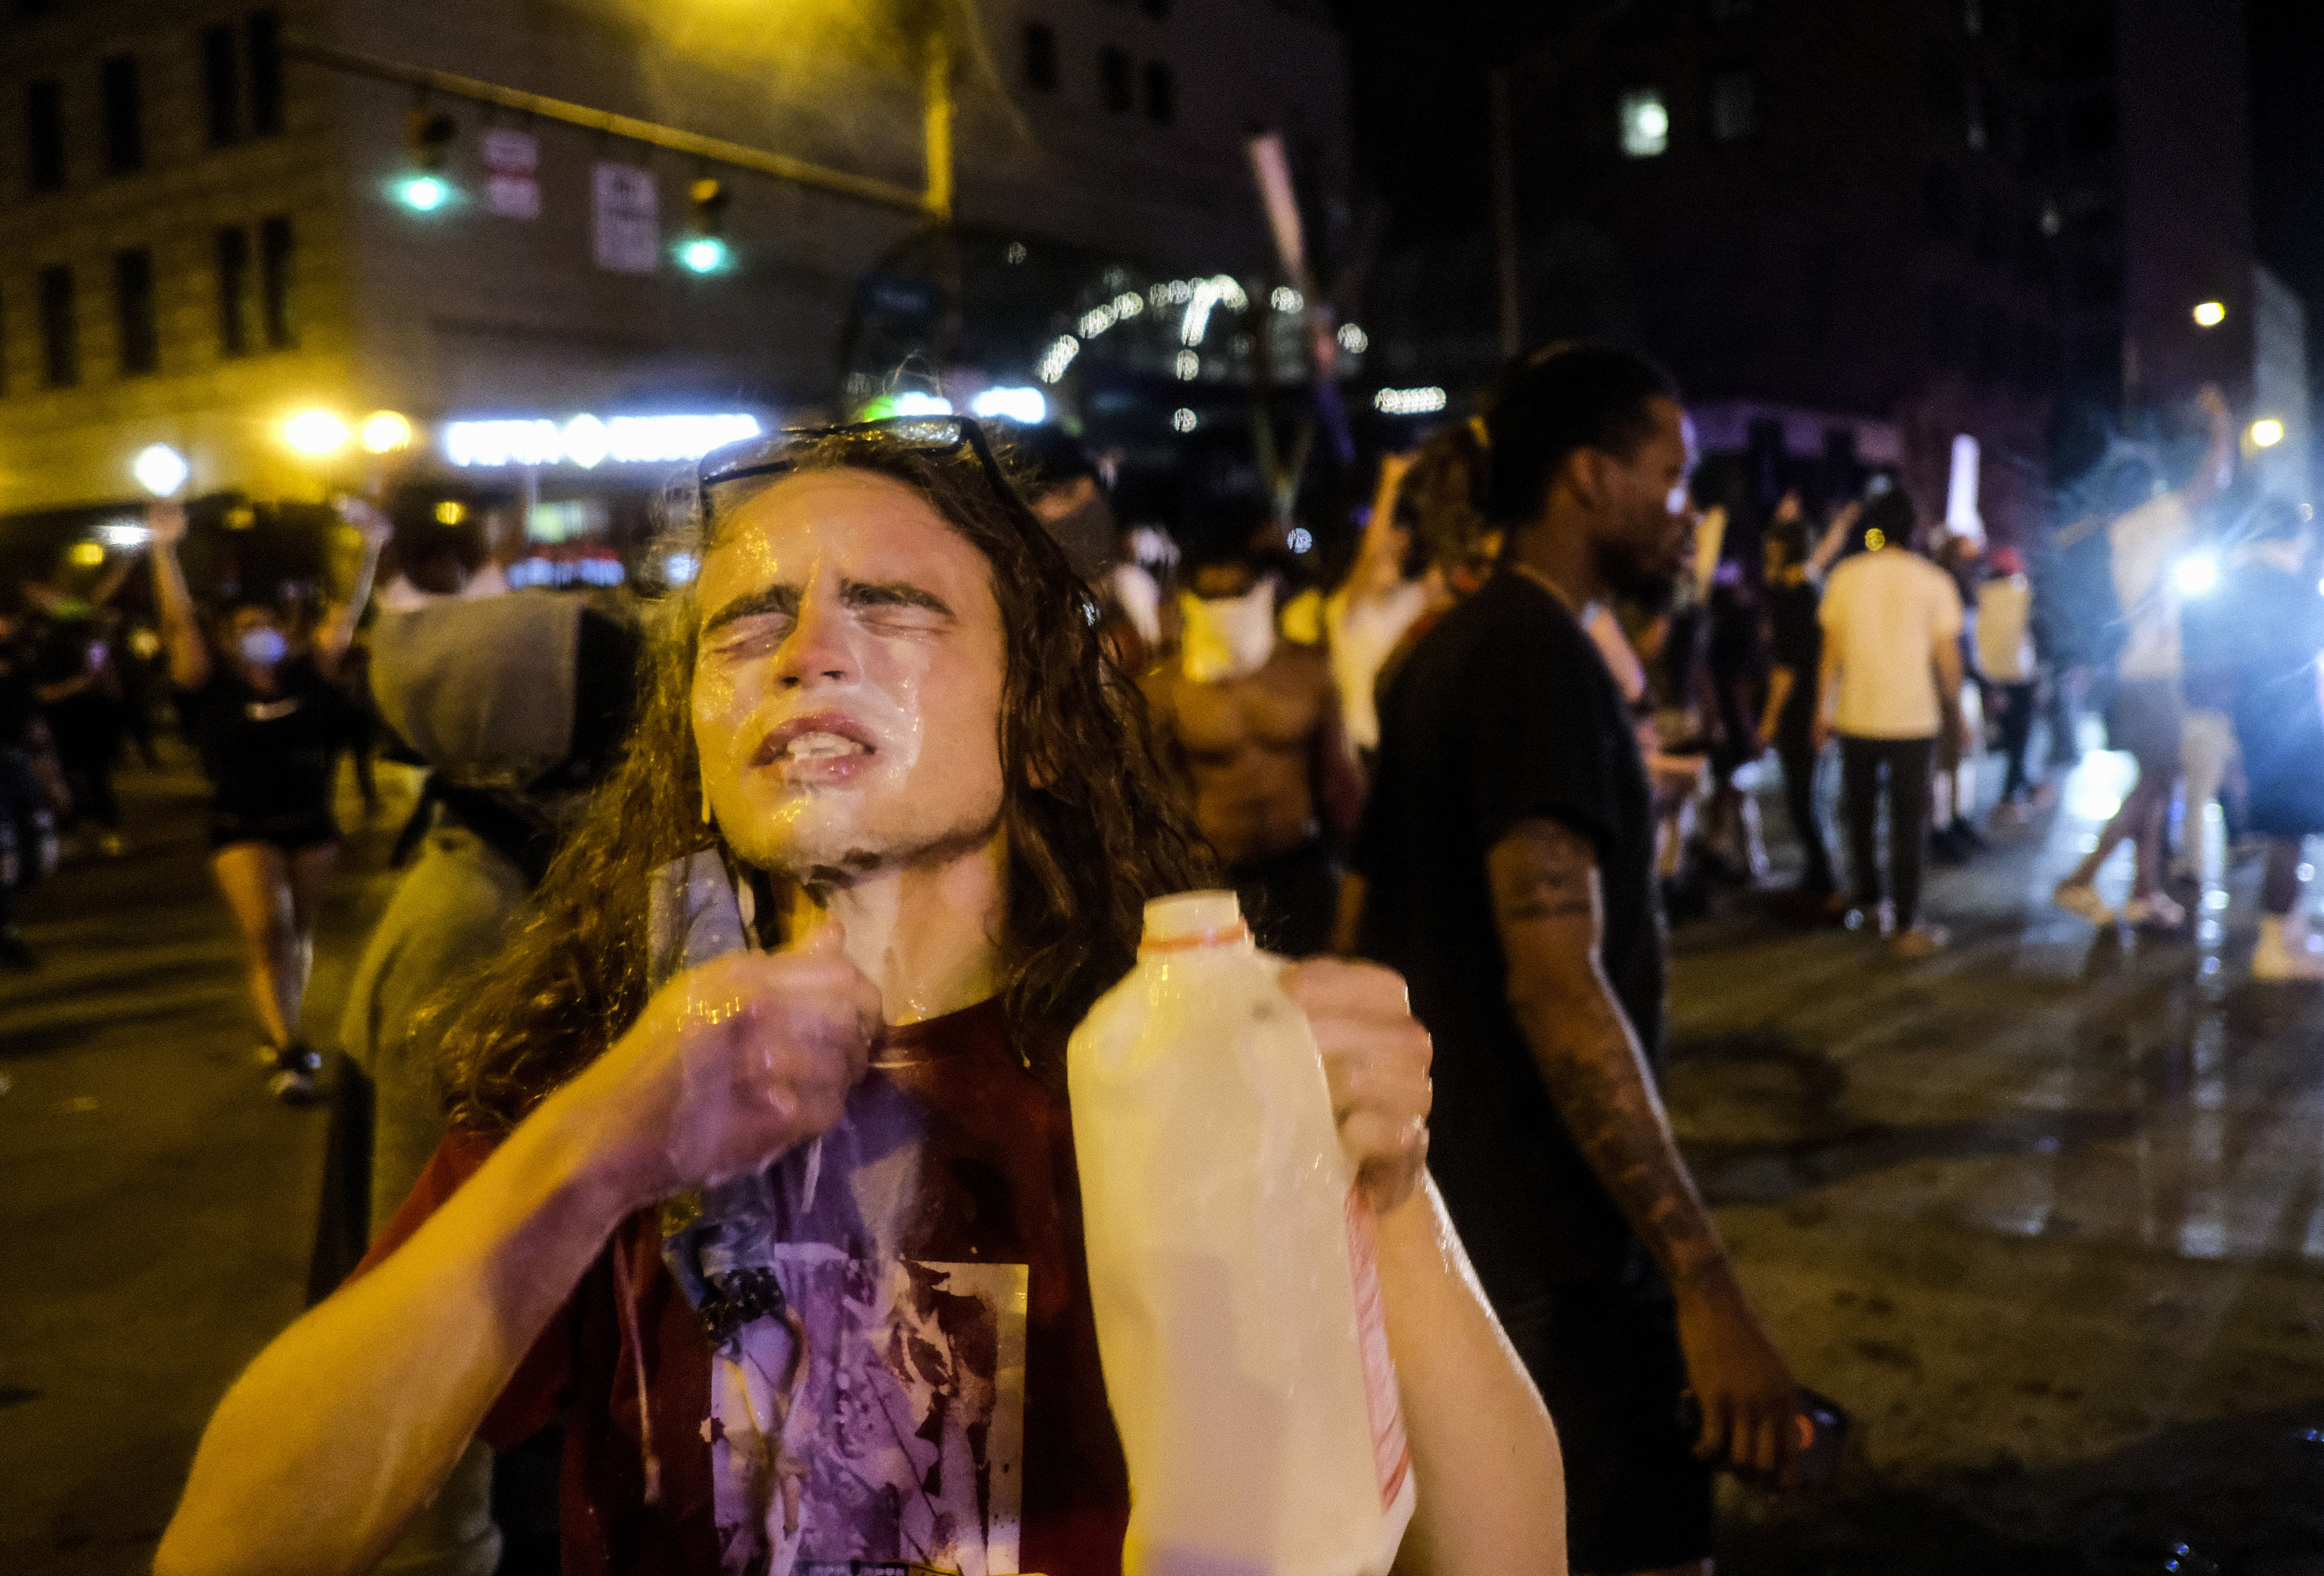 A protester pours what appears to be milk on their face during a demonstration in Columbus, Ohio, on May 28.